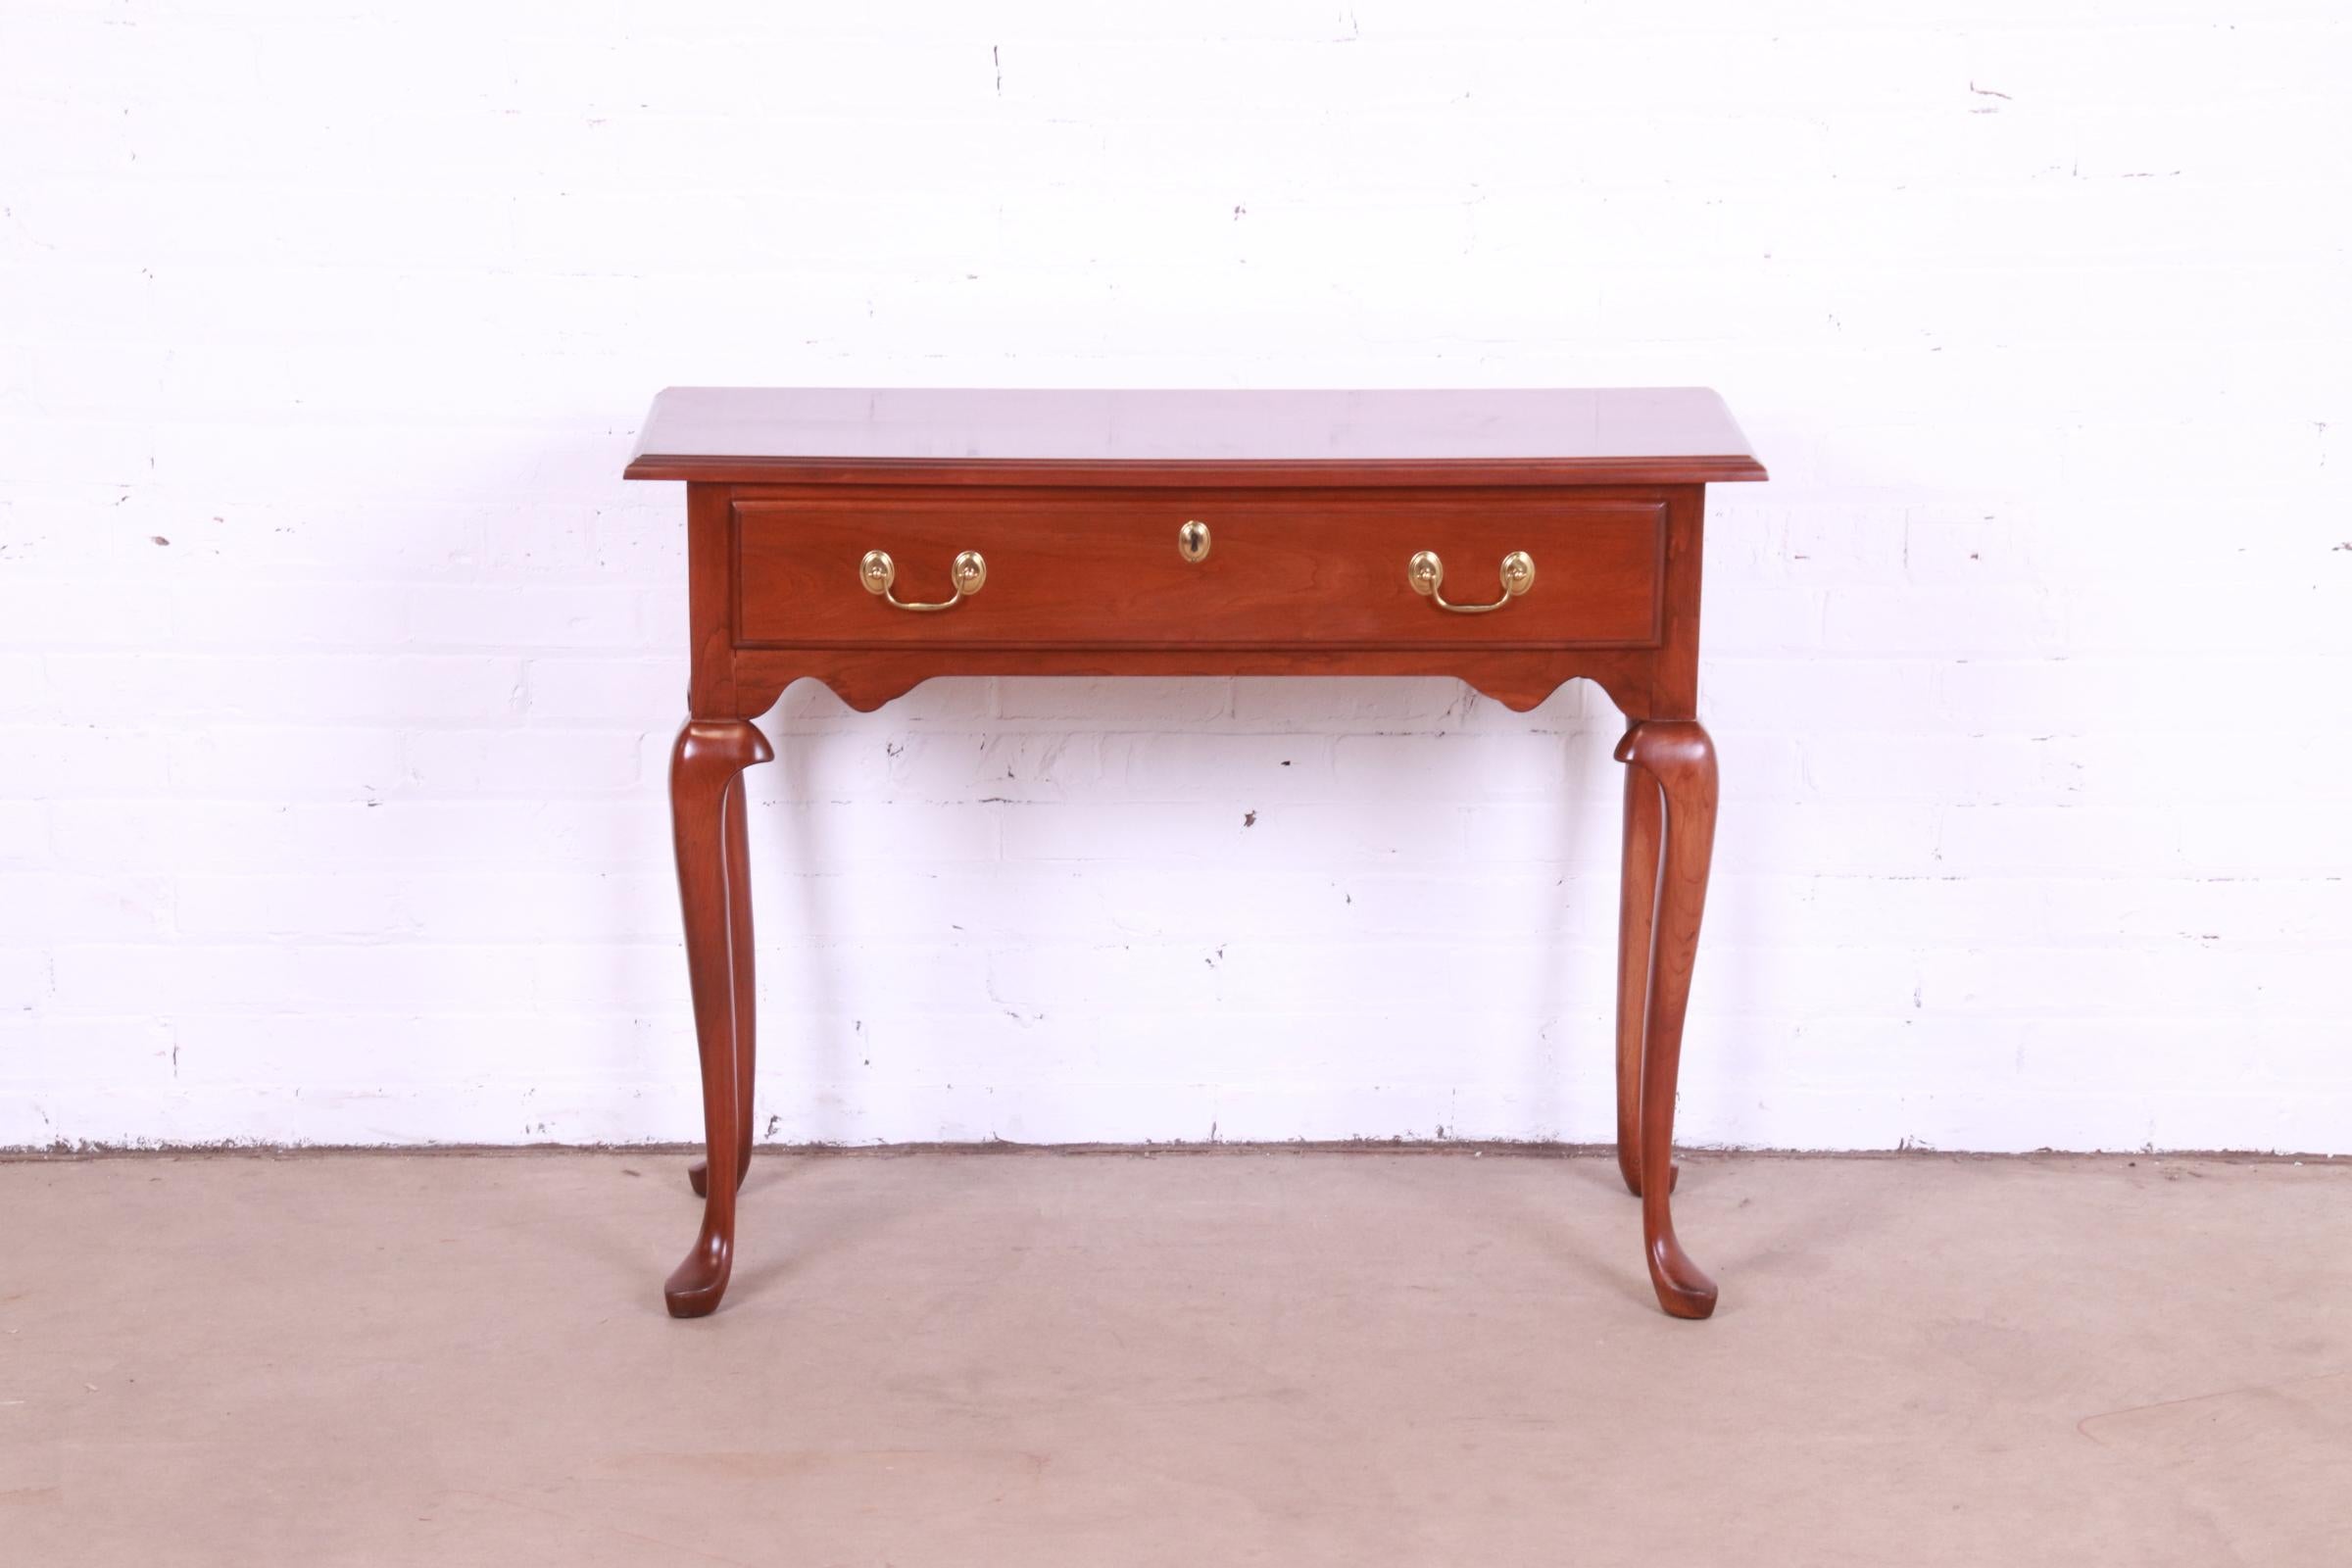 Harden Furniture Queen Anne Solid Cherry Wood Console or Sofa Table In Good Condition For Sale In South Bend, IN